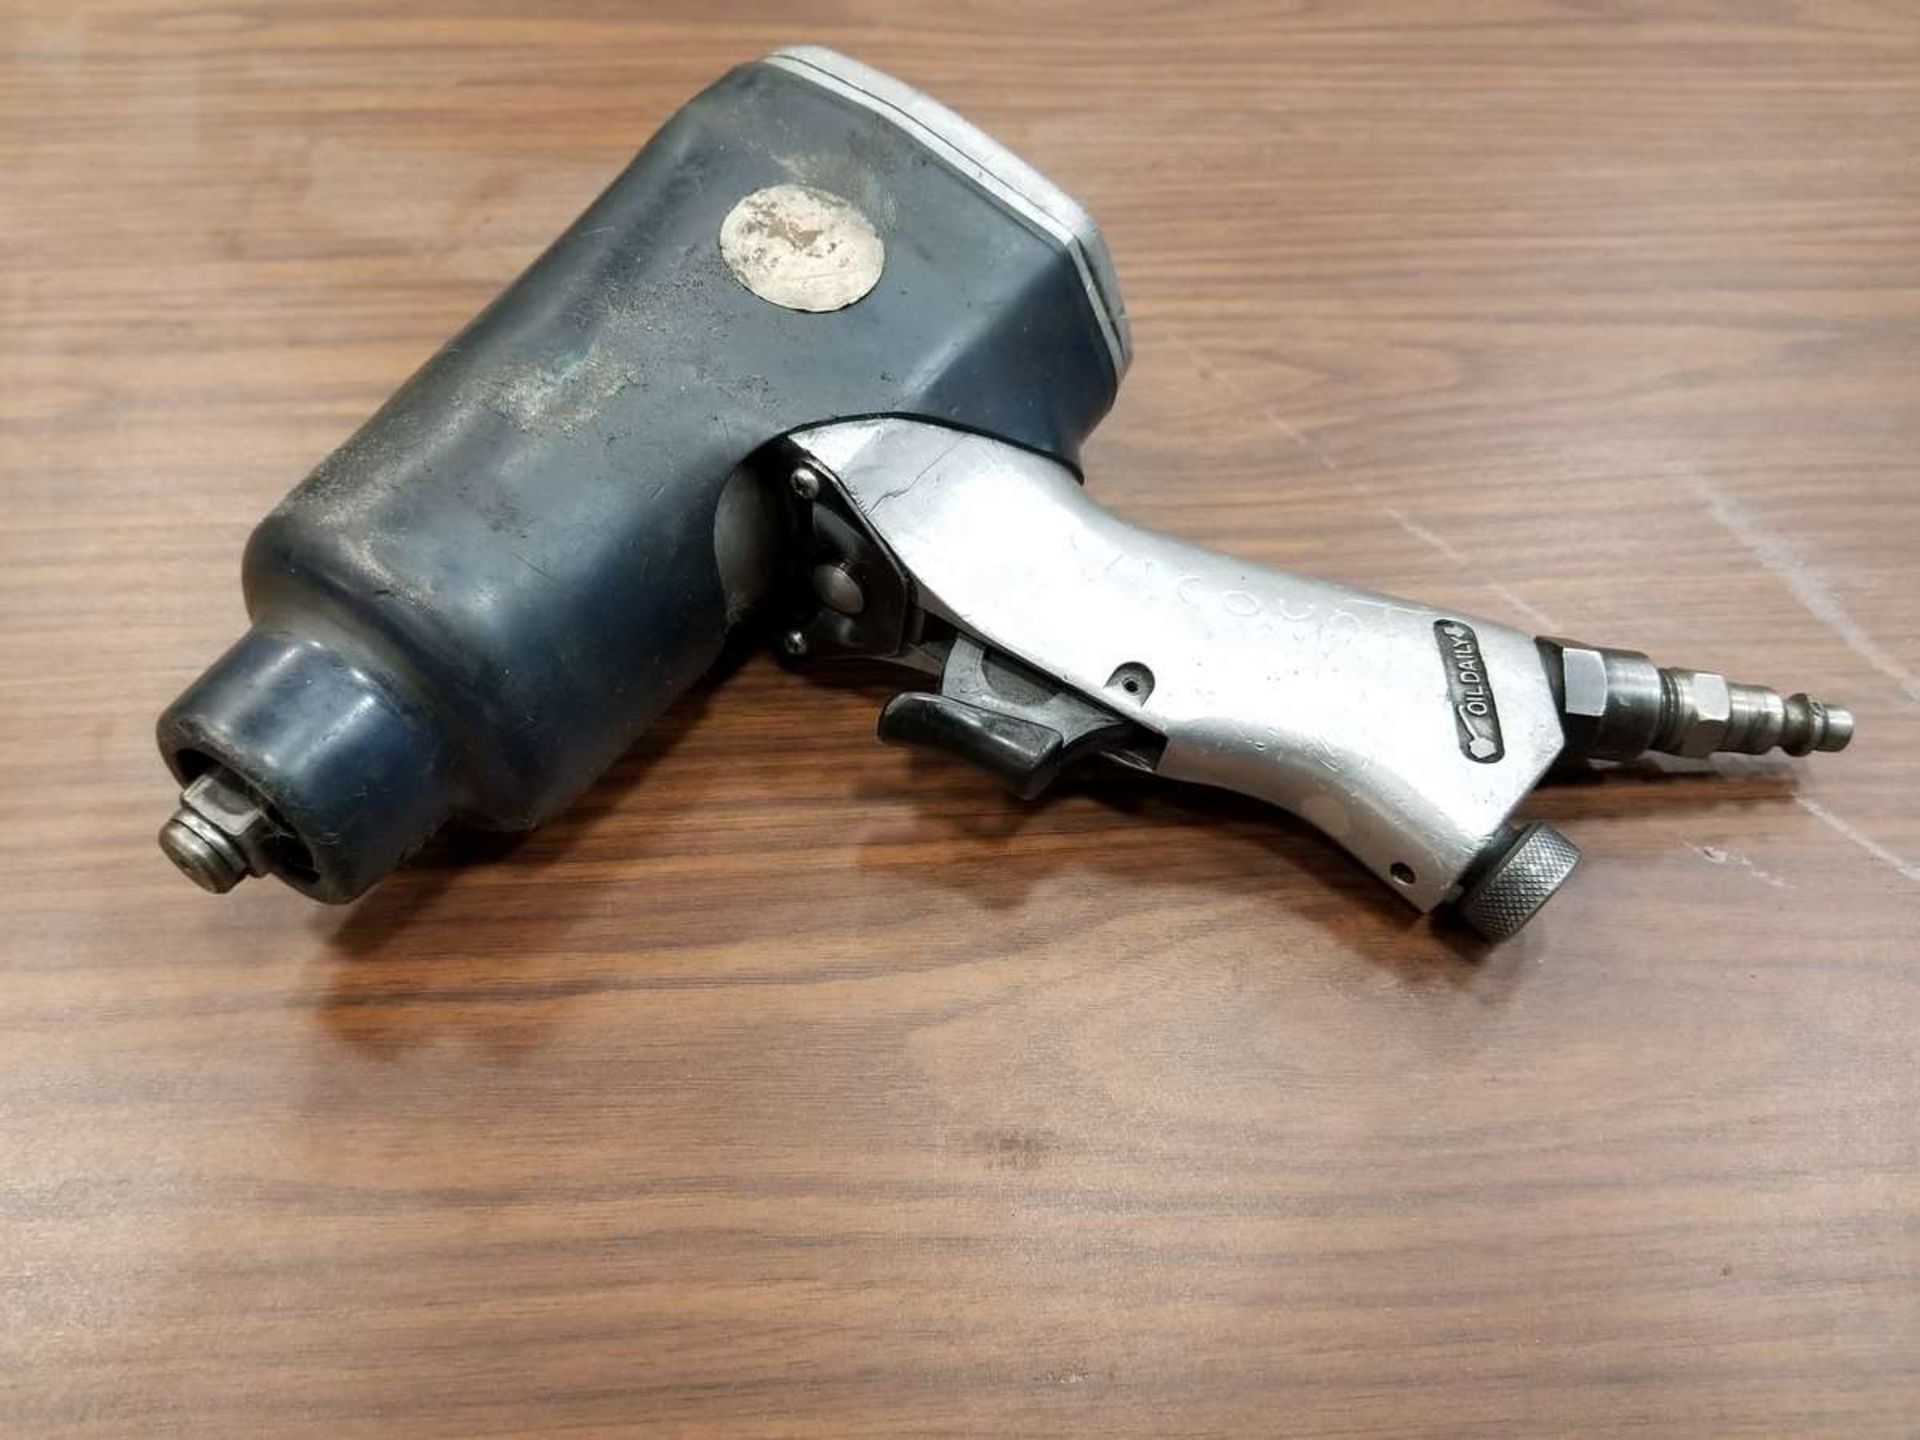 1/2" Pneumatic Impact Wrench. - Image 2 of 2